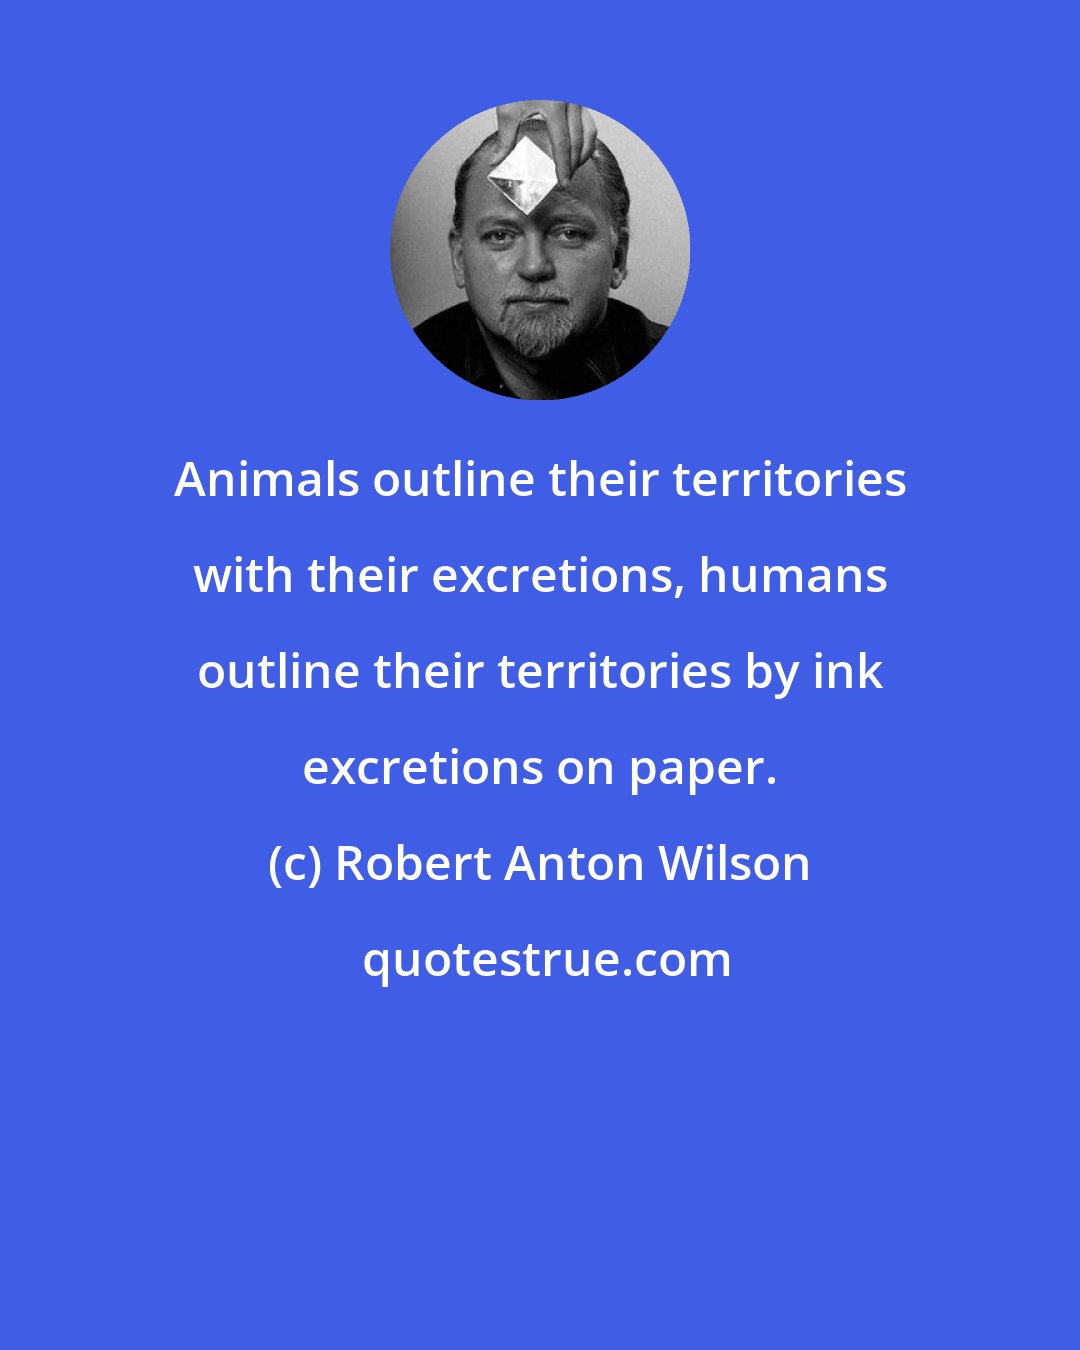 Robert Anton Wilson: Animals outline their territories with their excretions, humans outline their territories by ink excretions on paper.